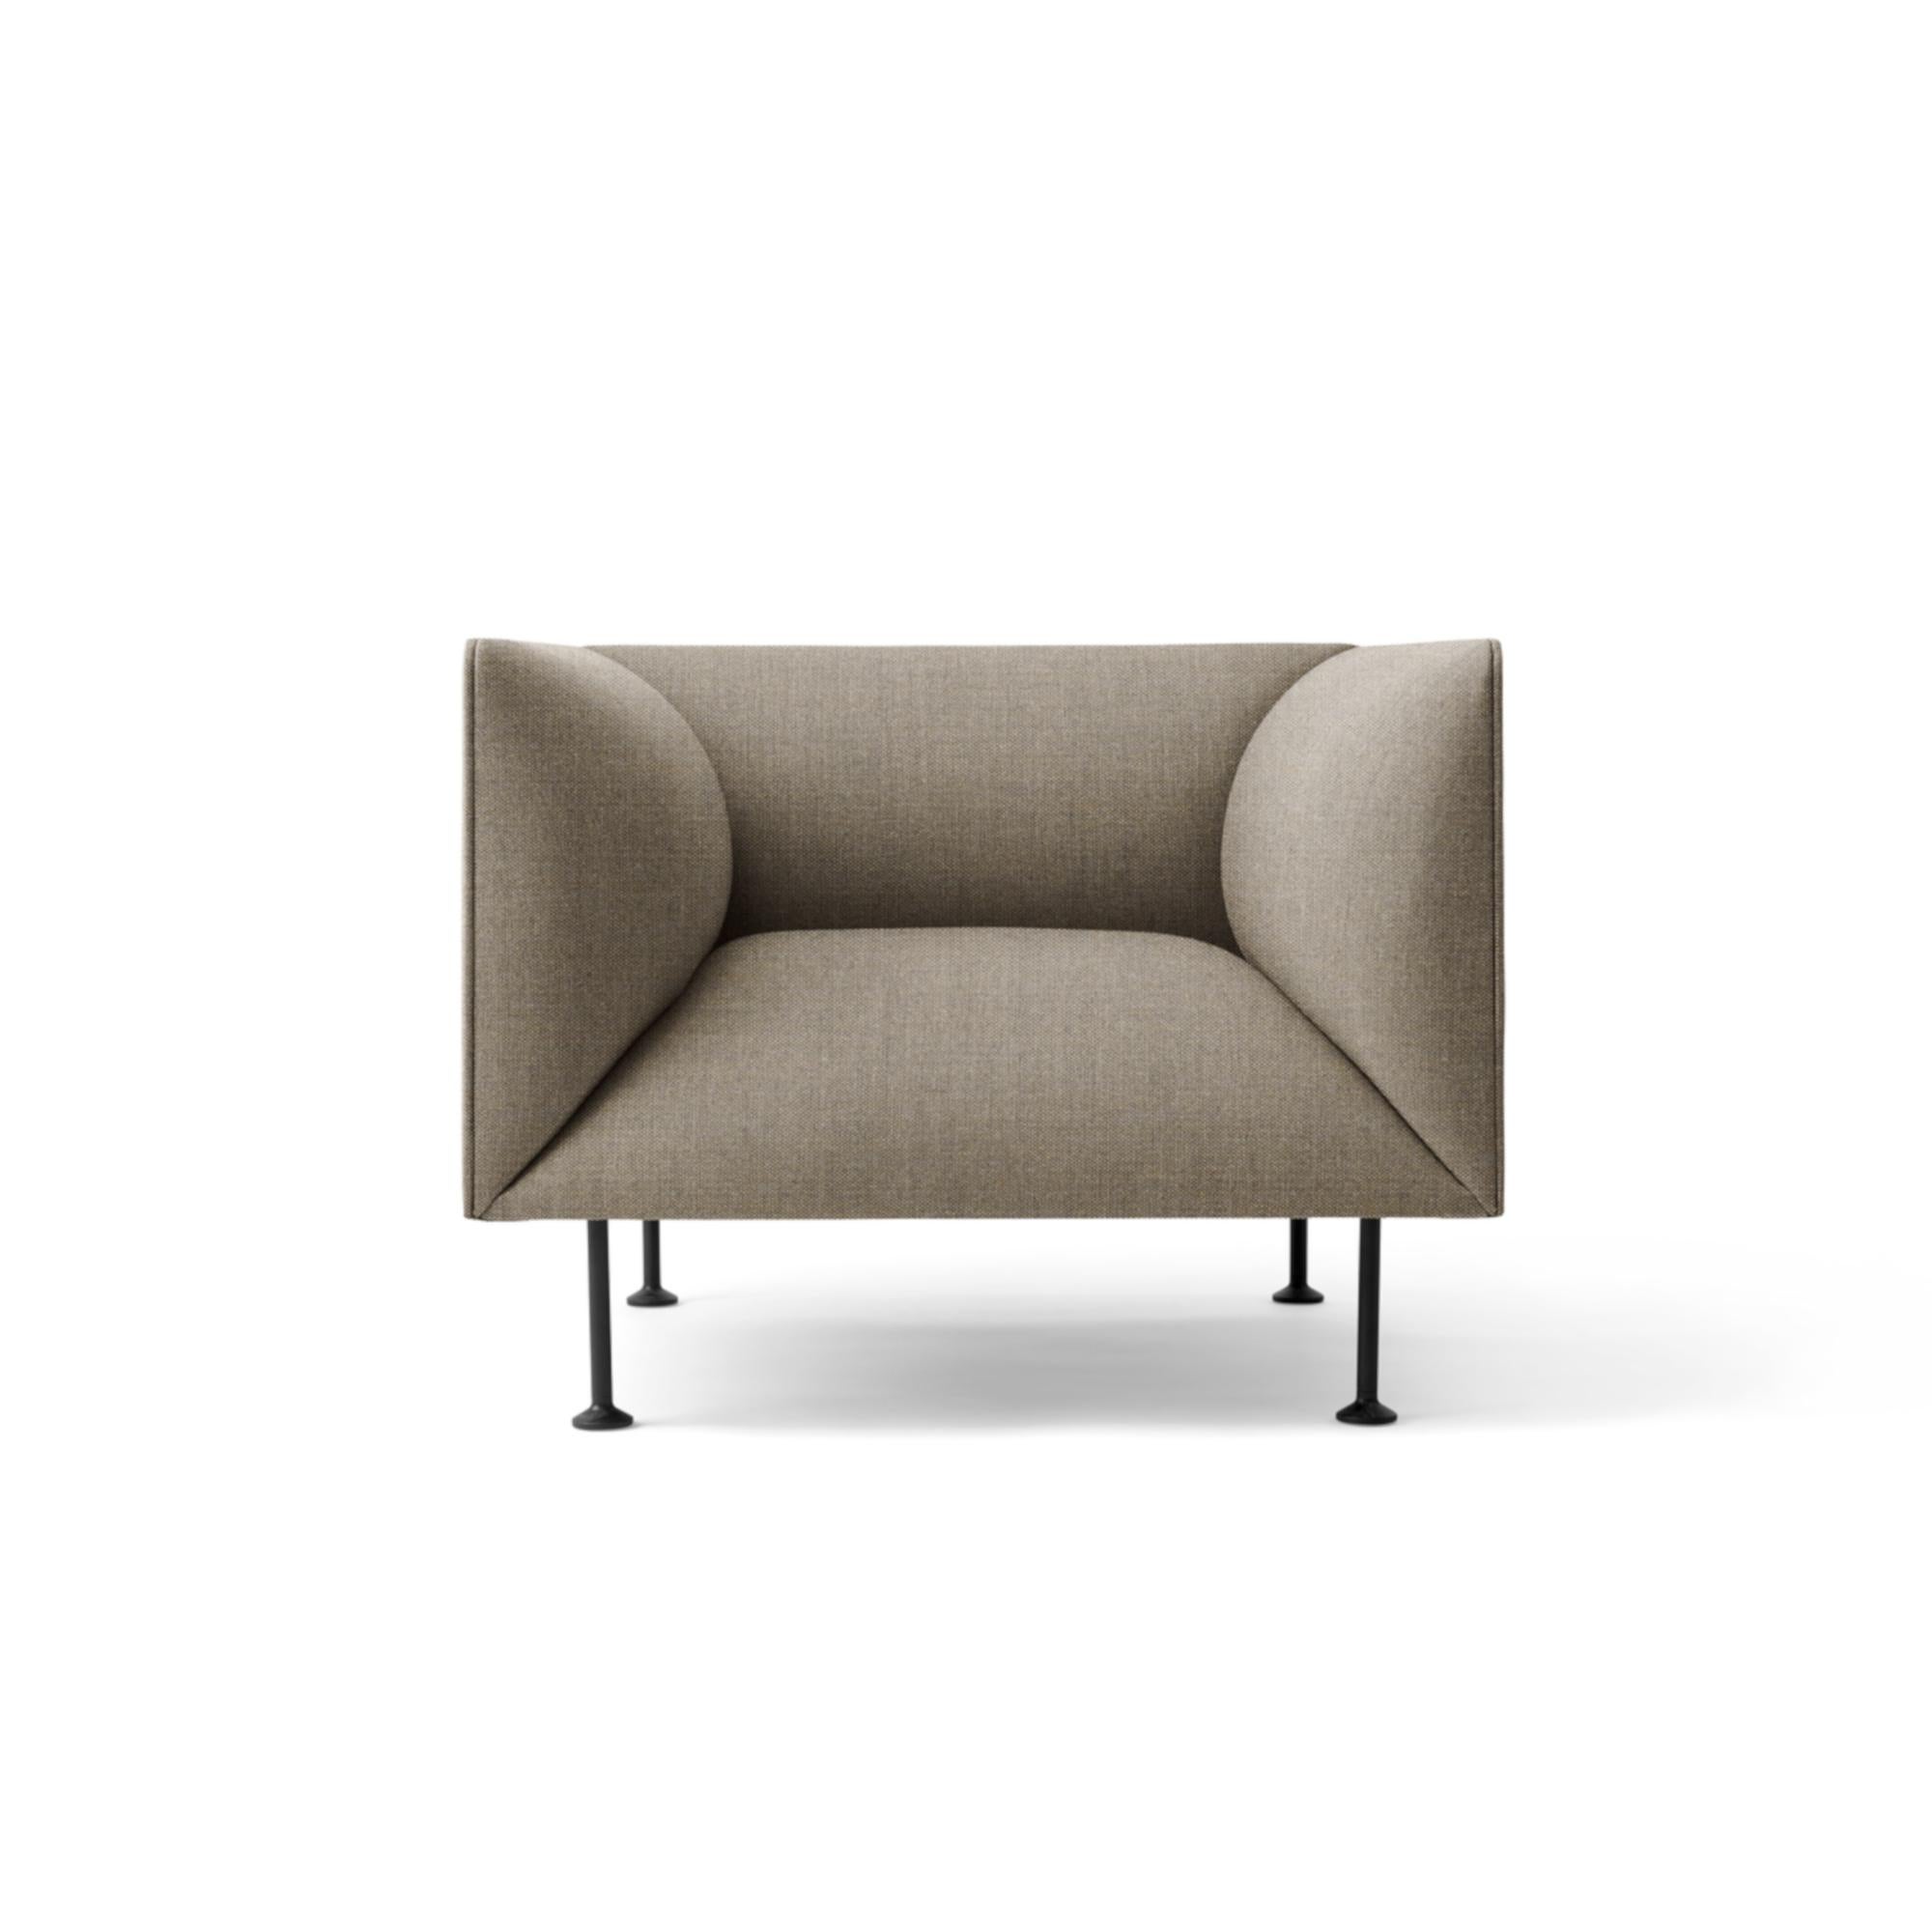 Godot is a comfortable and generous sofa series comprising 2- and 3-seat sofas as well as an armchair. The inner “spaces” of the sofa are designed in sizes allowing for a comfortable seating position without limiting the freedom of movement and the